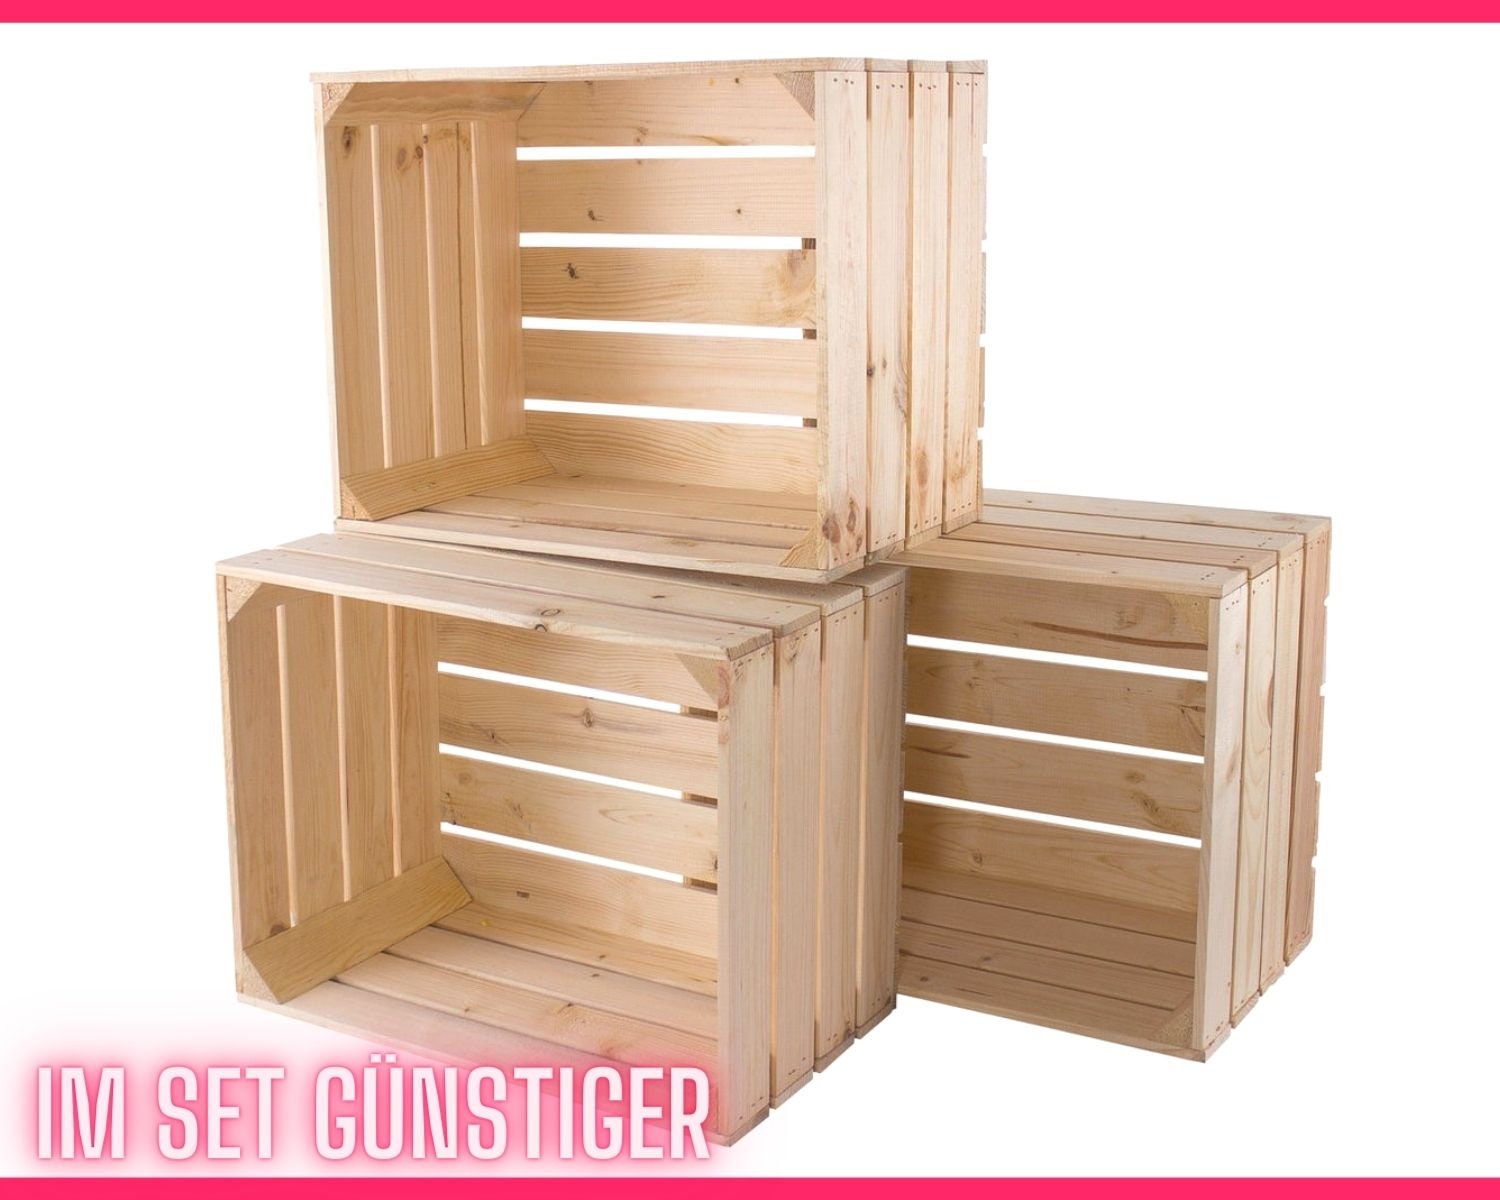 Buy 3x,4x,5x New Untreated Wooden Box 50x40x30 Cm the Wooden Box is  Stackable Can Be Used for Decoration, Plants, Bottles and Much More Online  in India 